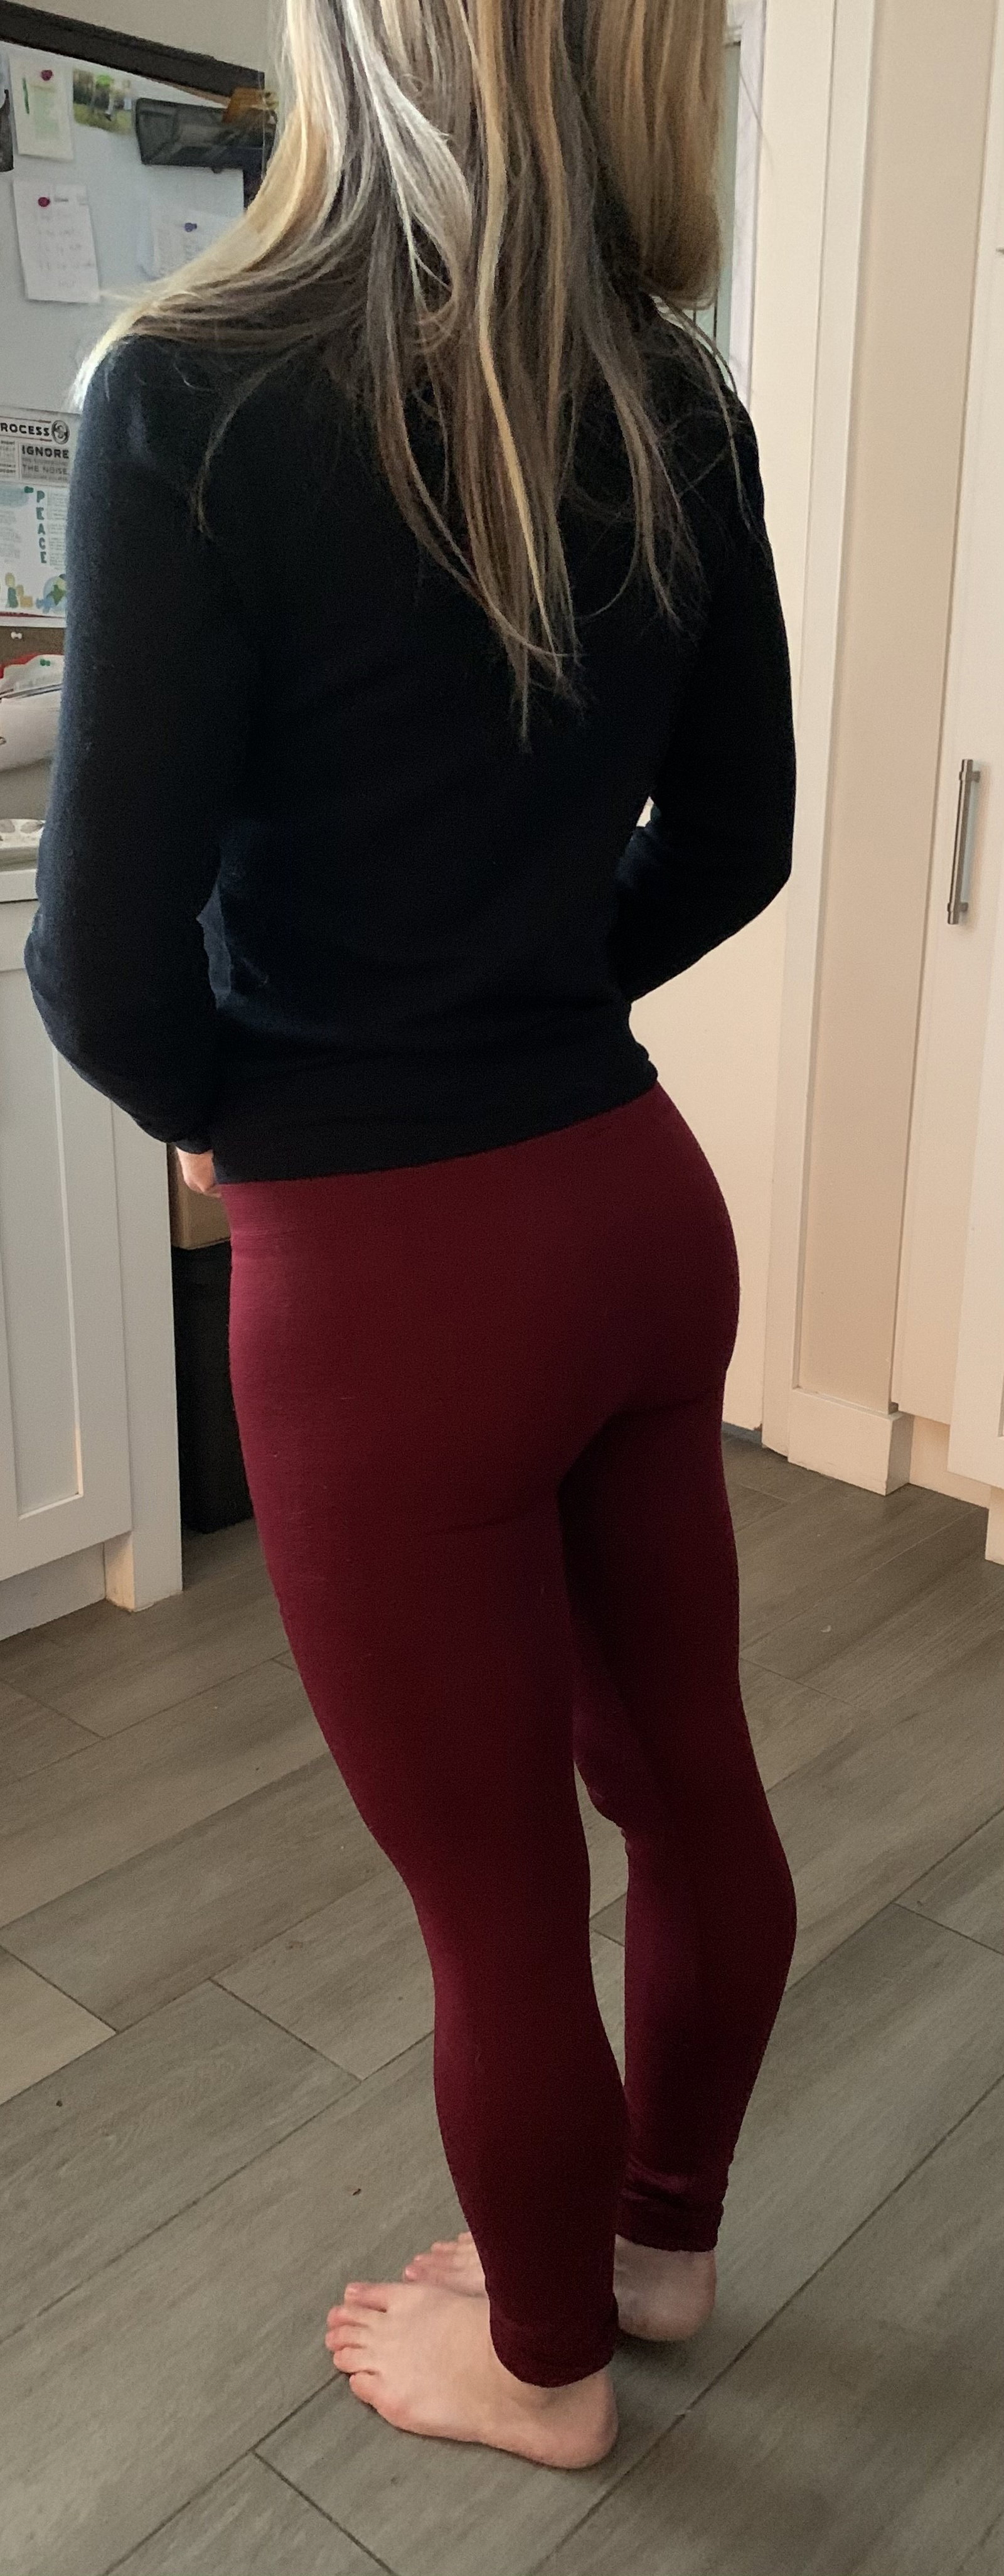 Photo by Canuckcouple with the username @Canuckcouple, who is a verified user,  December 31, 2020 at 10:00 PM. The post is about the topic OnOff and the text says '44yo milf 🔥'